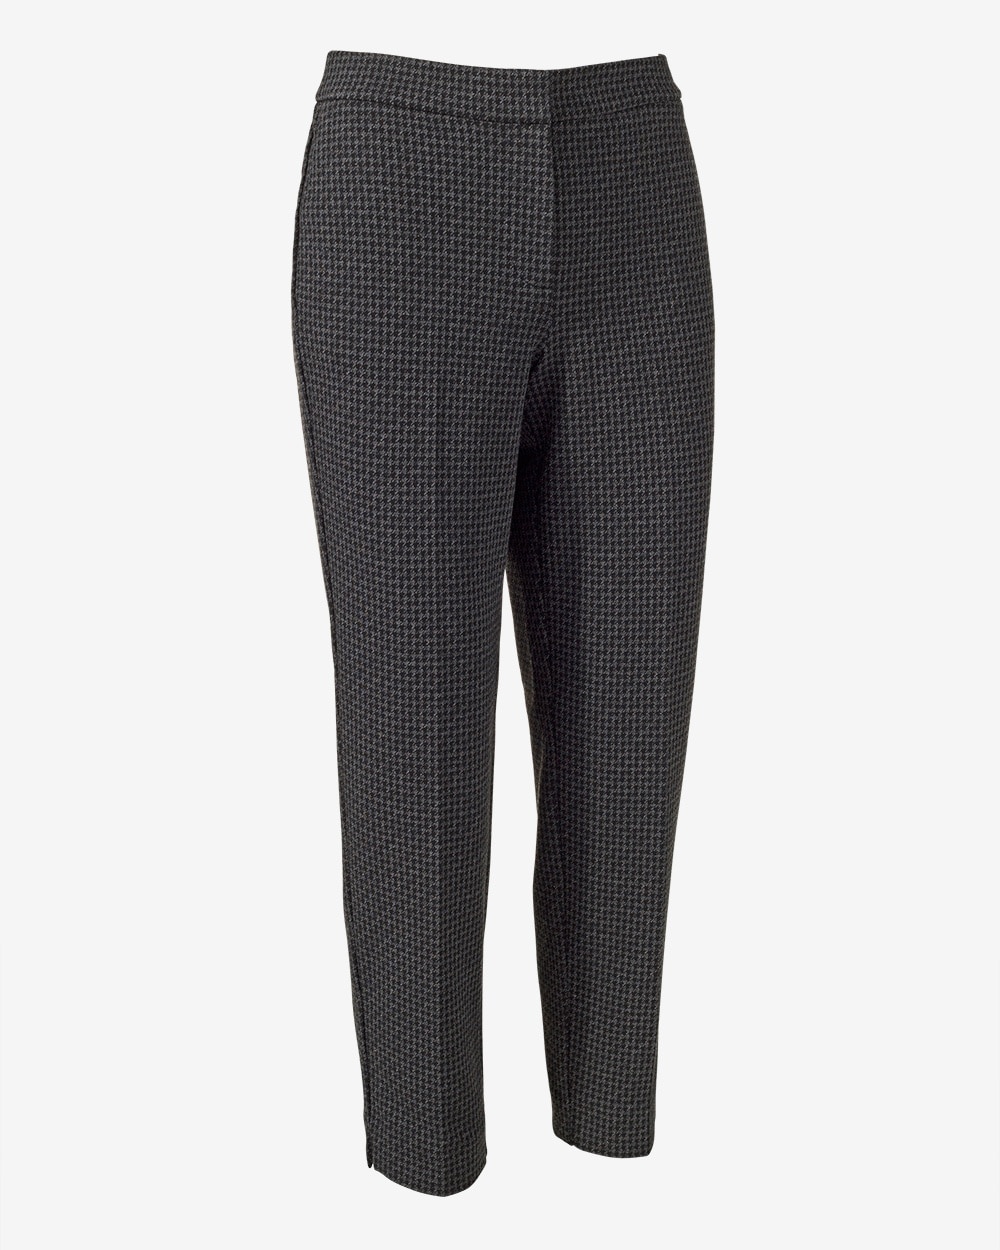 Houndstooth Knit Straight Ankle Pants